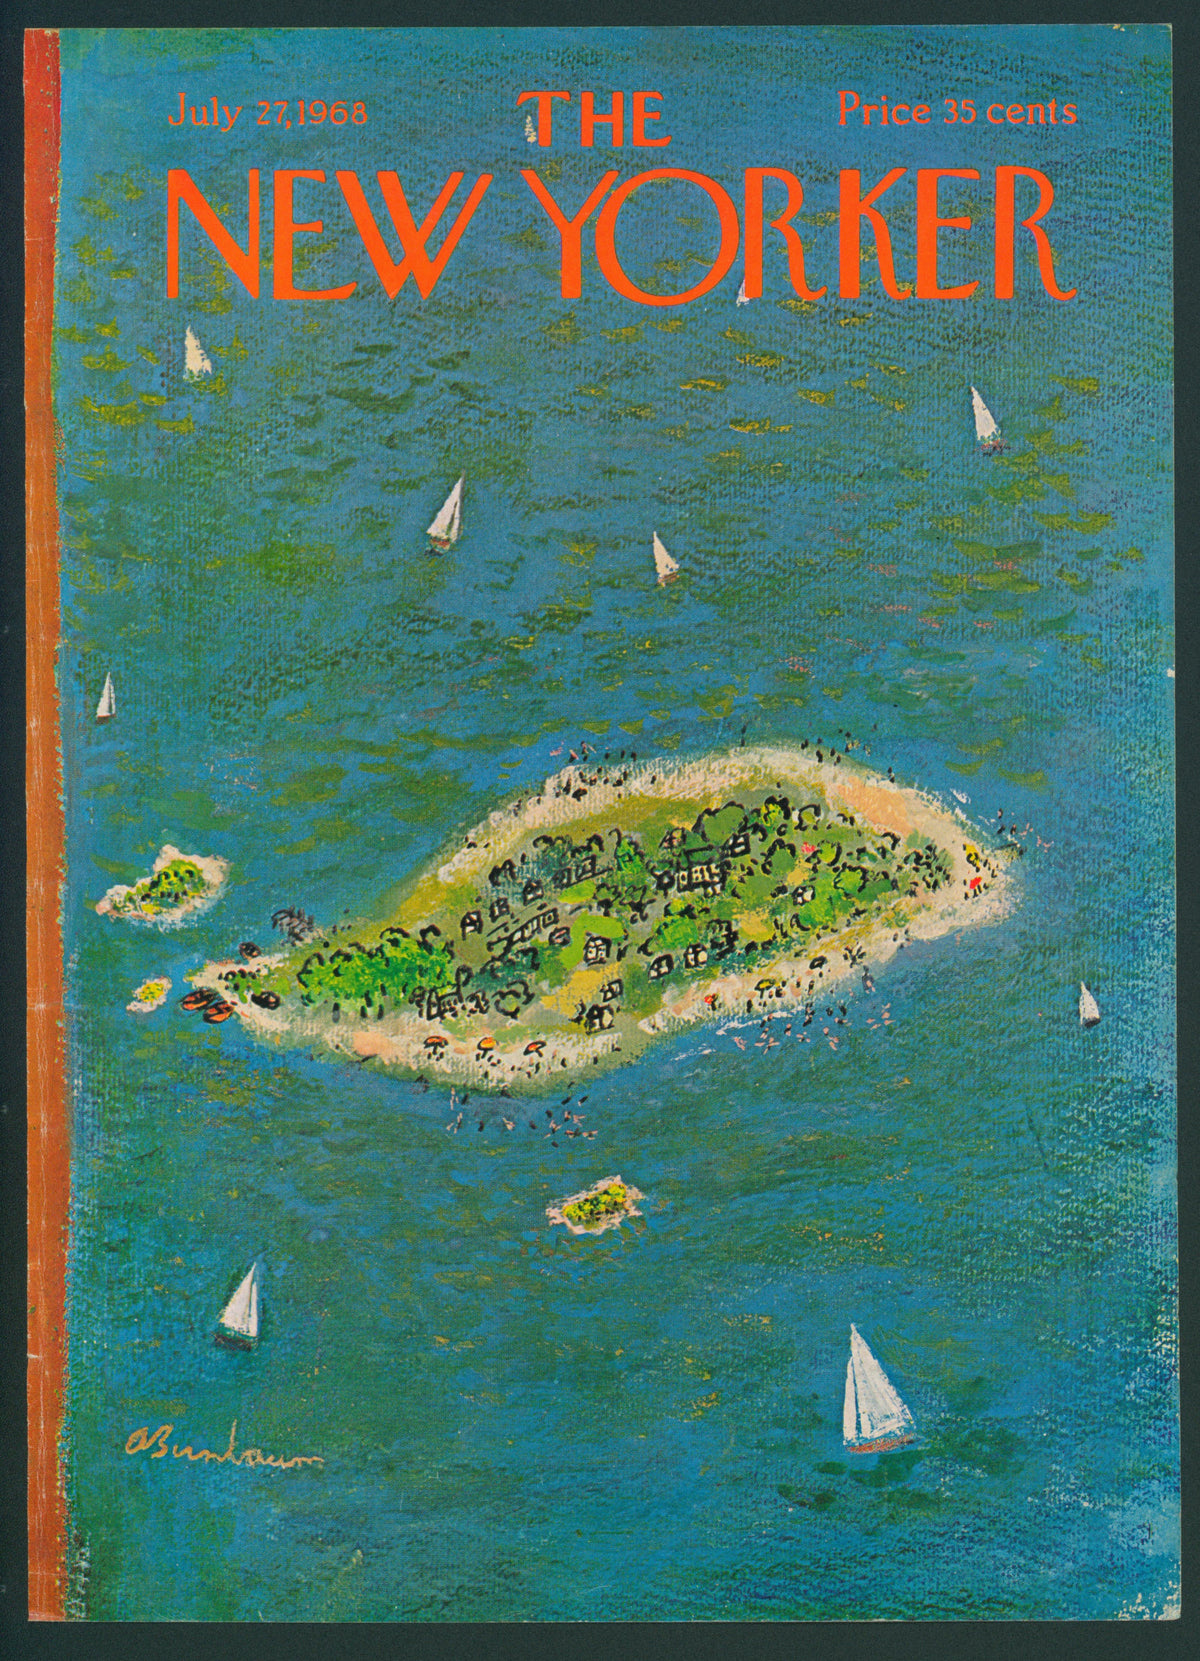 Summer Island- The New Yorker - Authentic Vintage Antique Print